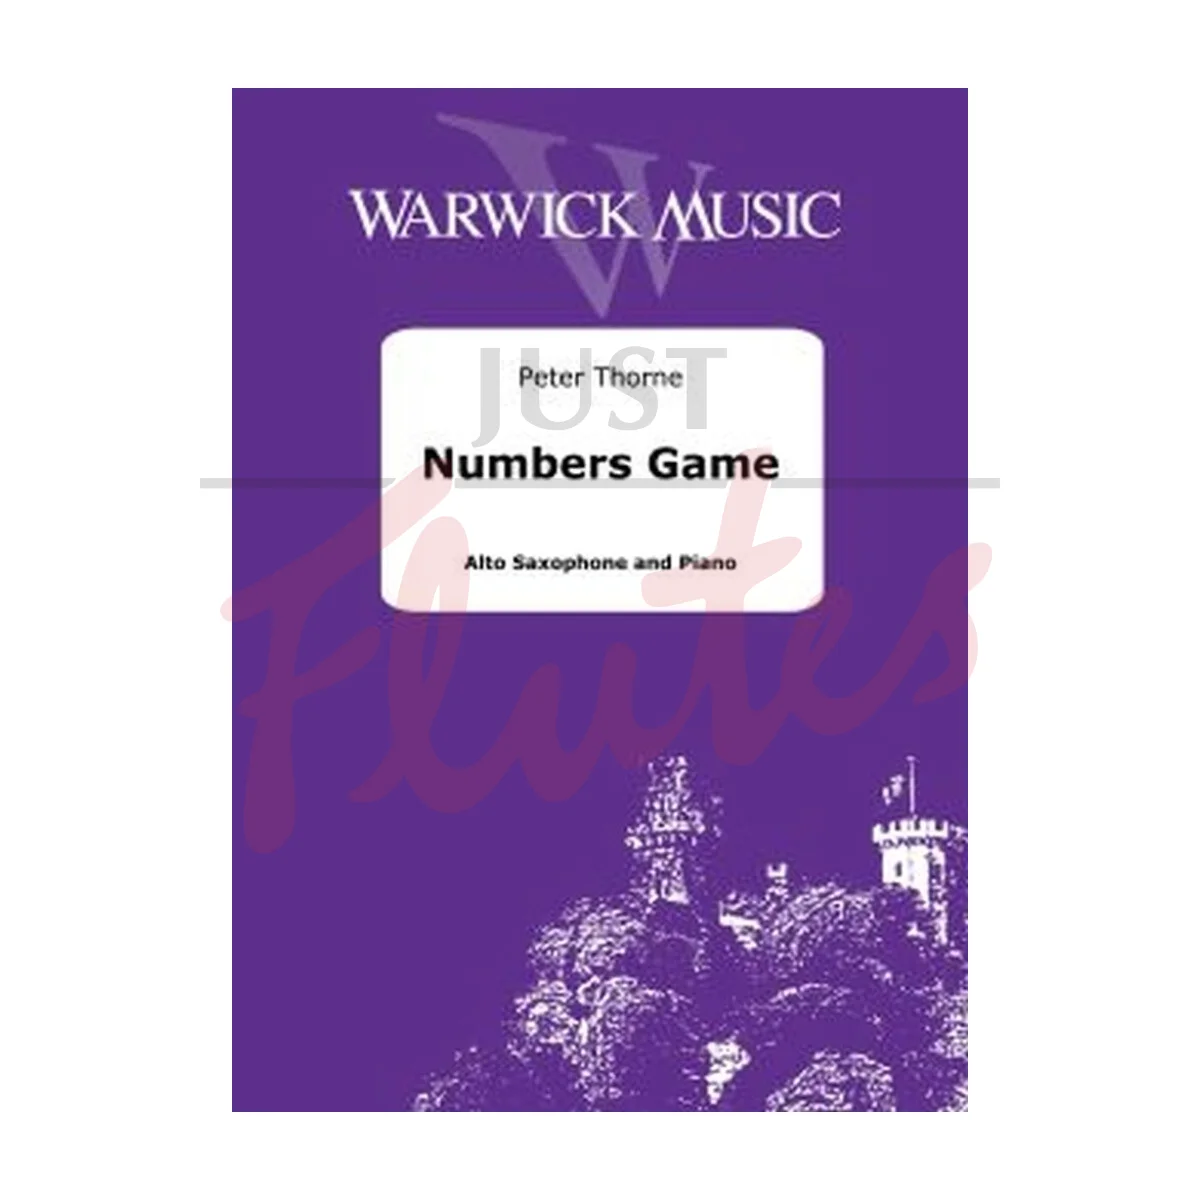 Numbers Game for Alto Saxophone and Piano